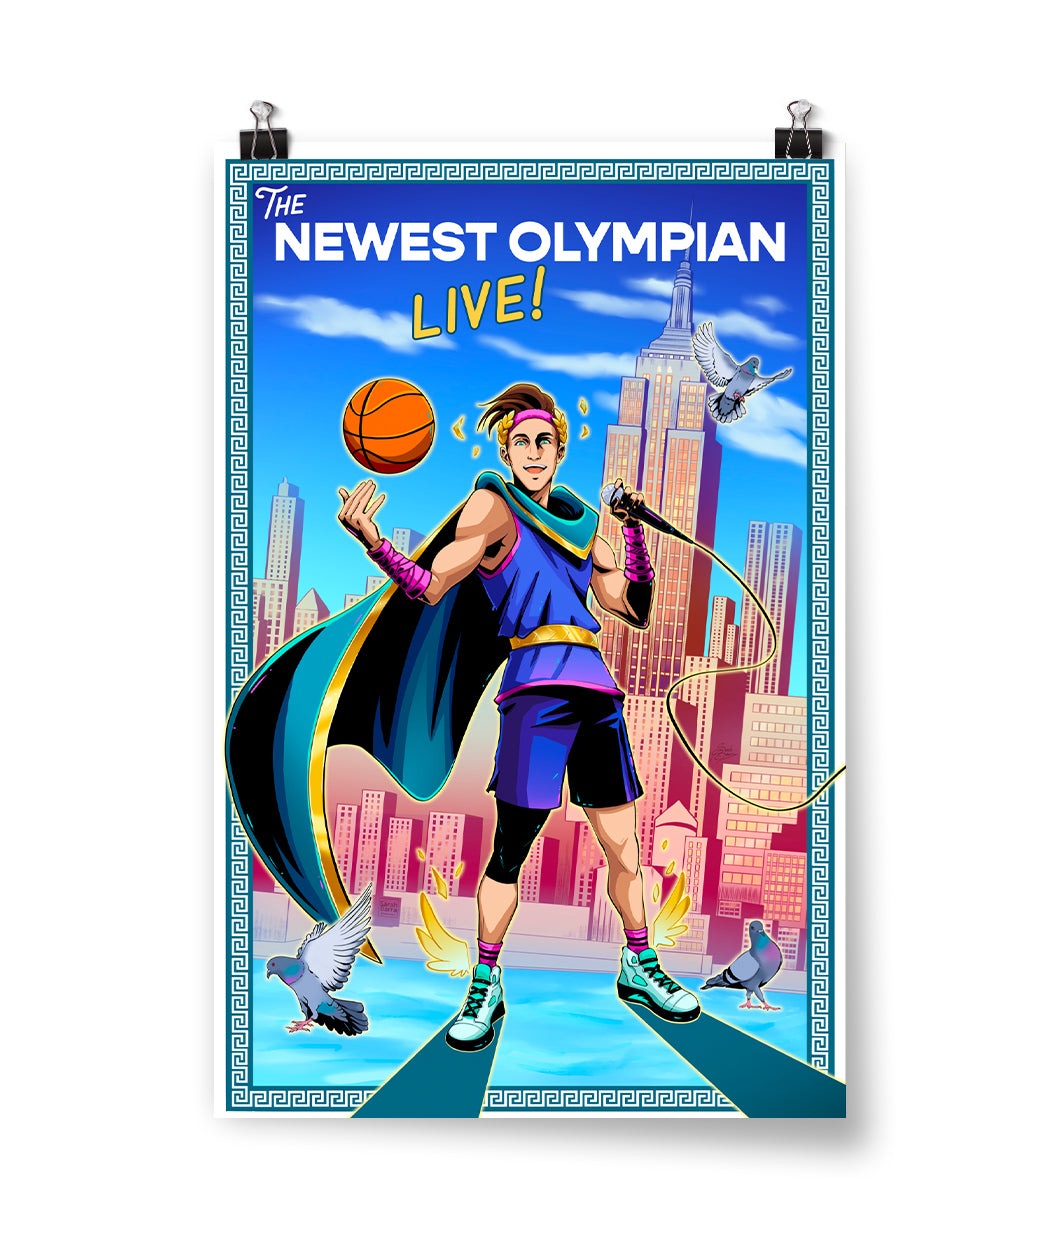 An image for the Newest Olympian Live Show showing someone holding a basketball, in front of skyscrapers, with a cape and pigeons flying around.